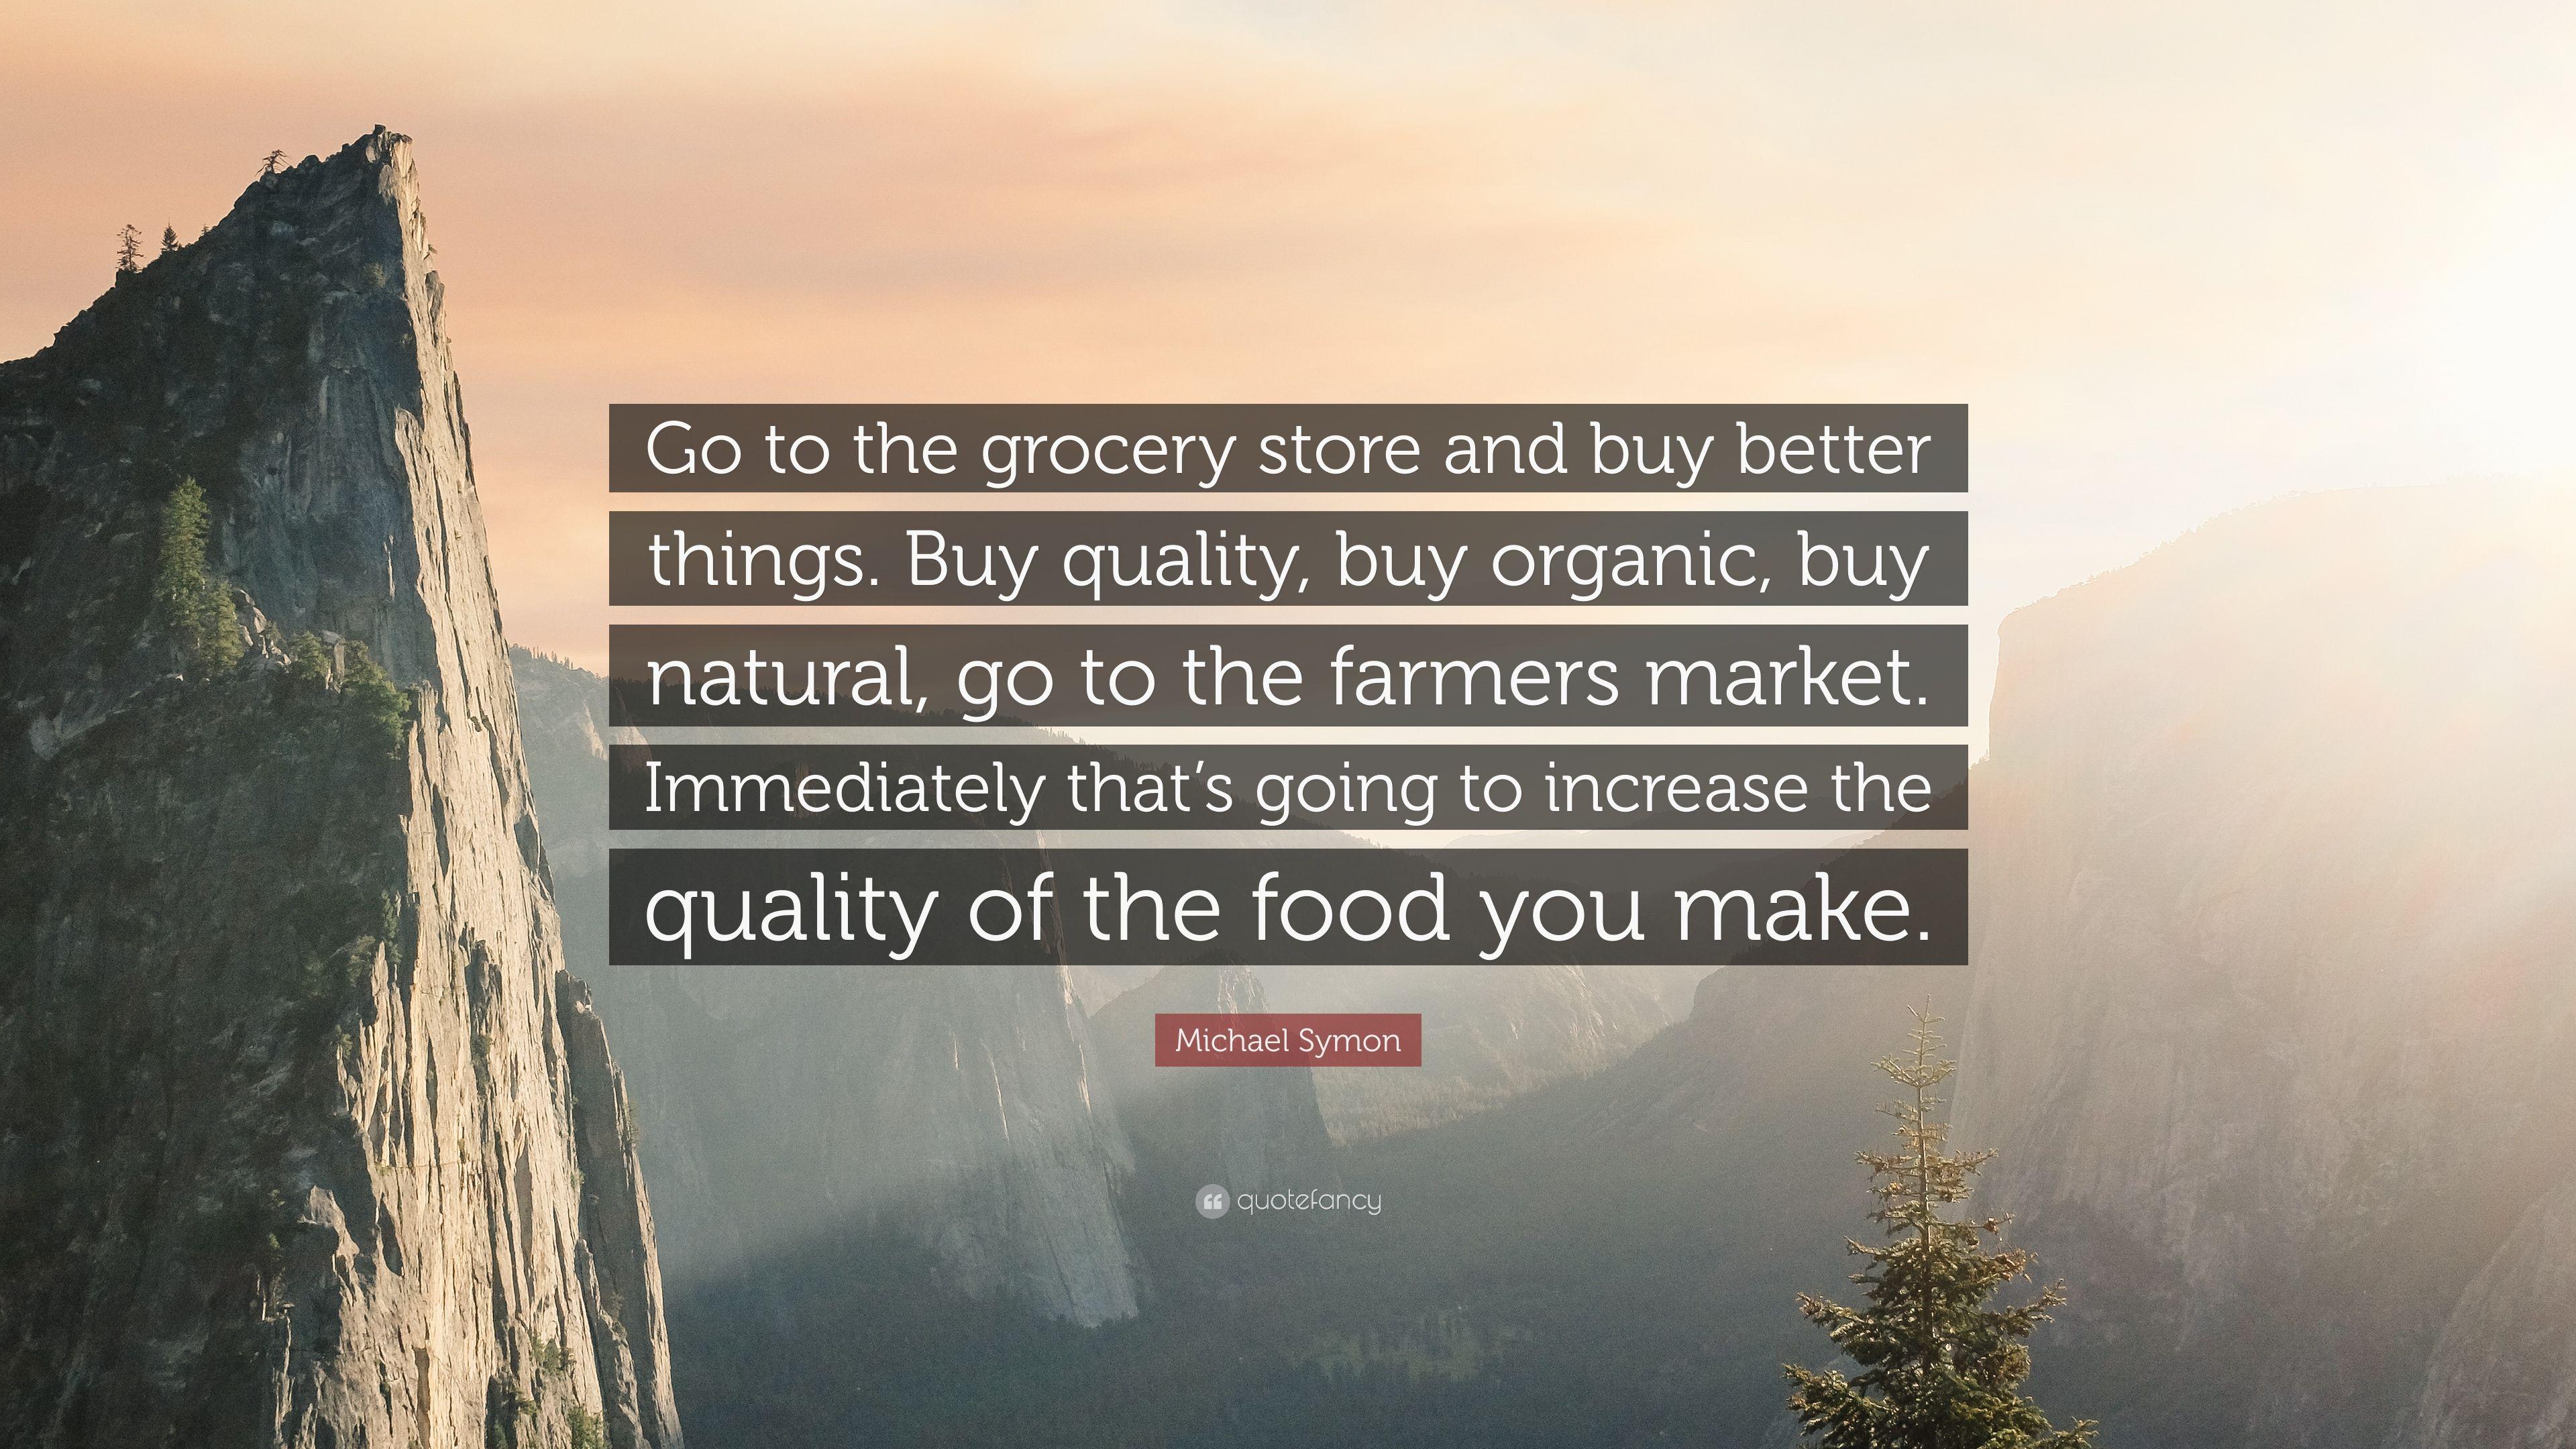 Michael Symon Quote: “Go to the grocery store and buy better things